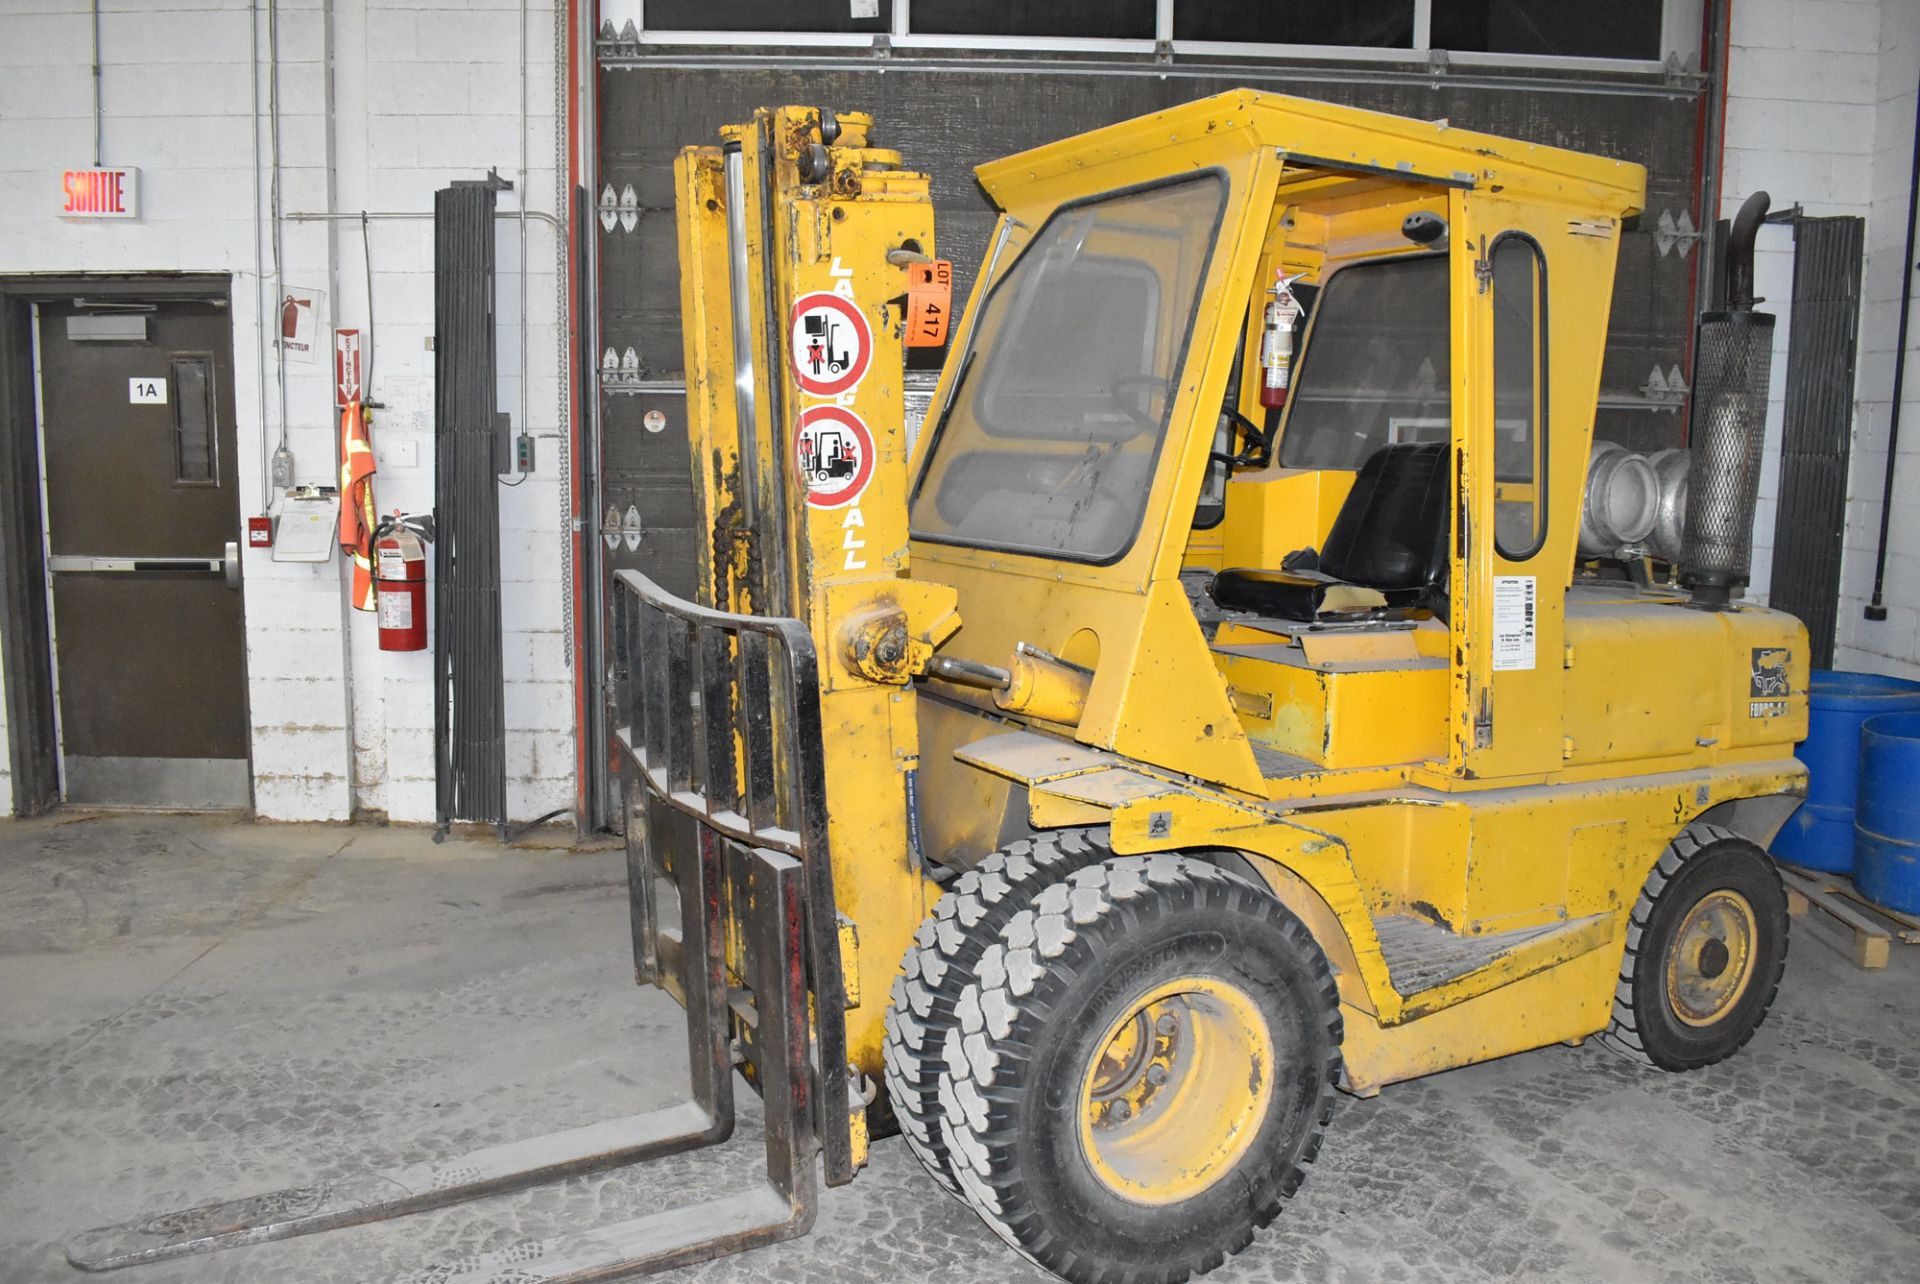 LANSING BAGNALL FOPR6 4.0 LPG OUTDOOR FORKLIFT WITH 8000 LB. CAPACITY, 185" MAX. LIFT HEIGHT, - Image 3 of 8